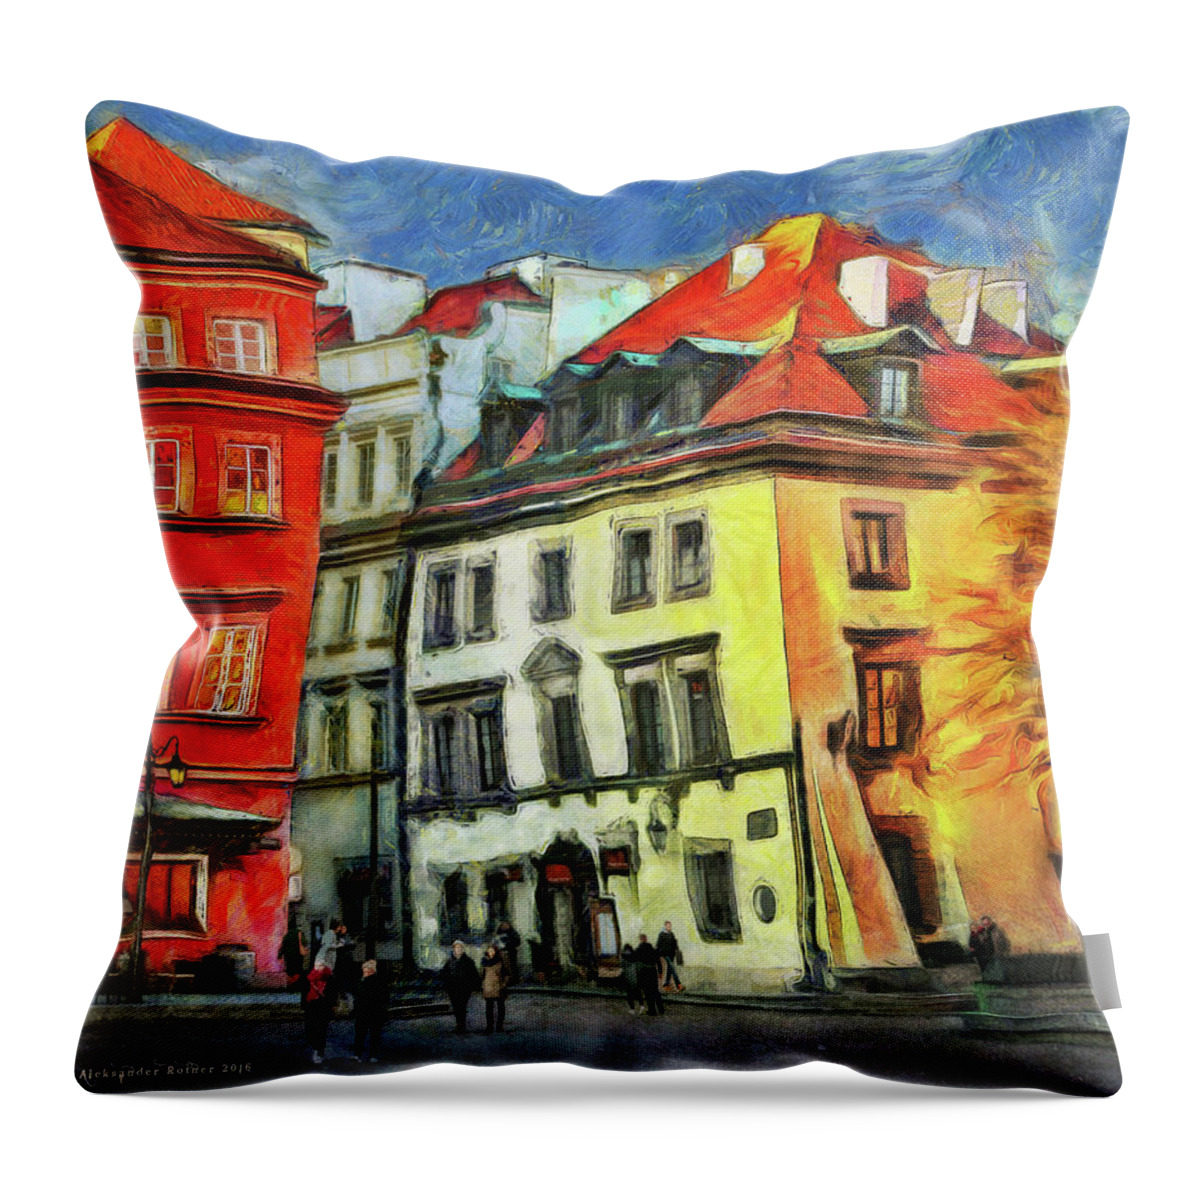  Throw Pillow featuring the photograph Old Town in Warsaw # 27 by Aleksander Rotner